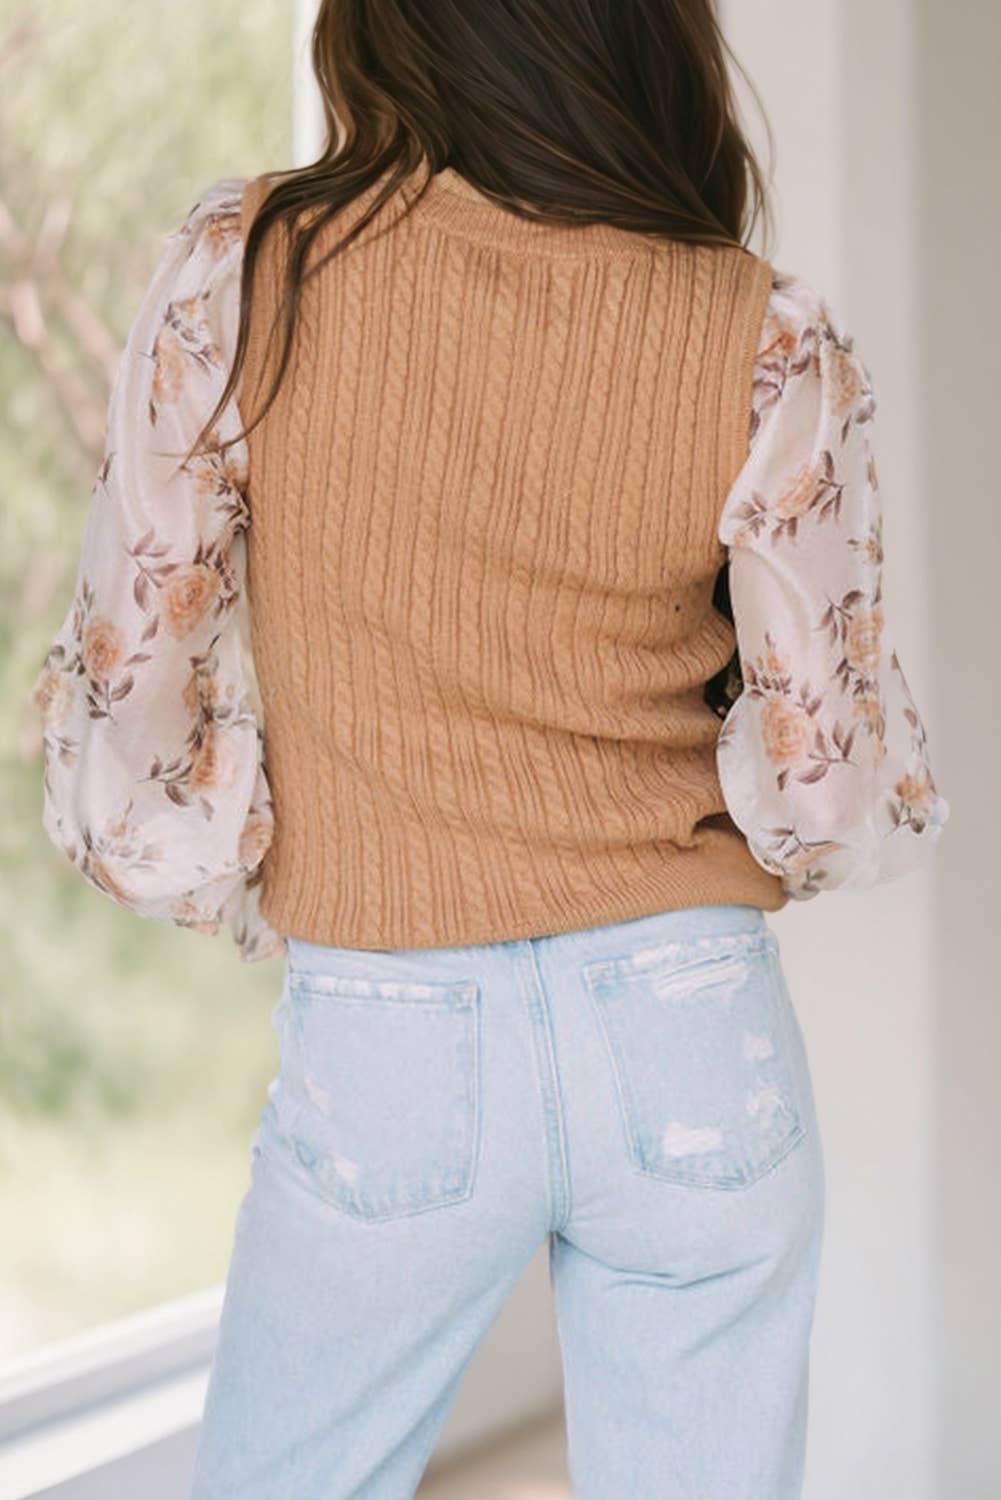 Sheepskin Floral Patchwork Ruffled Cuff Cable Knit Sweater